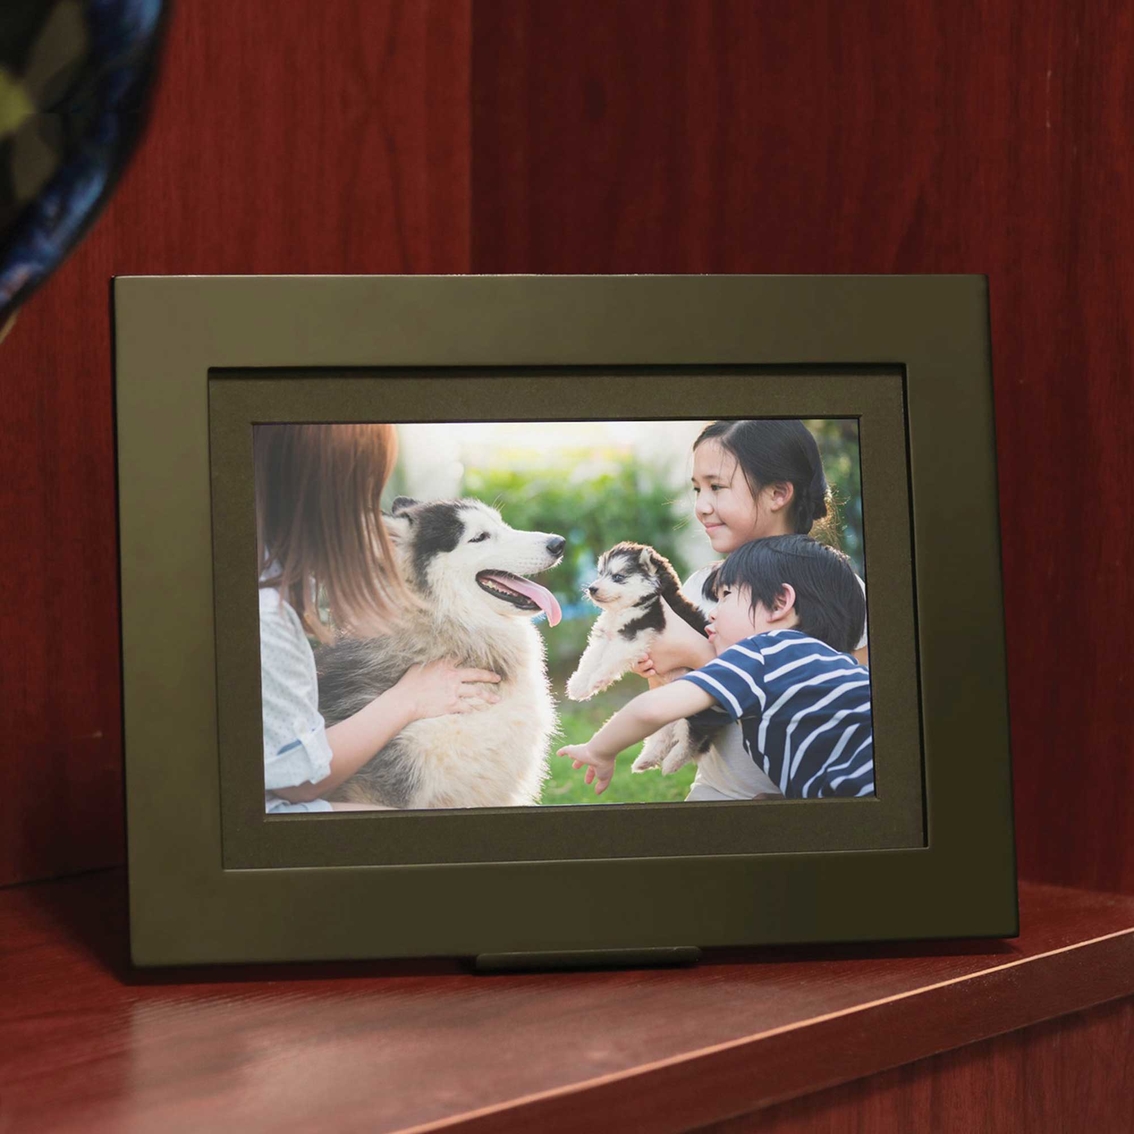 Brookstone Switchmate PhotoShare Friends and Family Cloud Frame 8 in. - Image 6 of 6